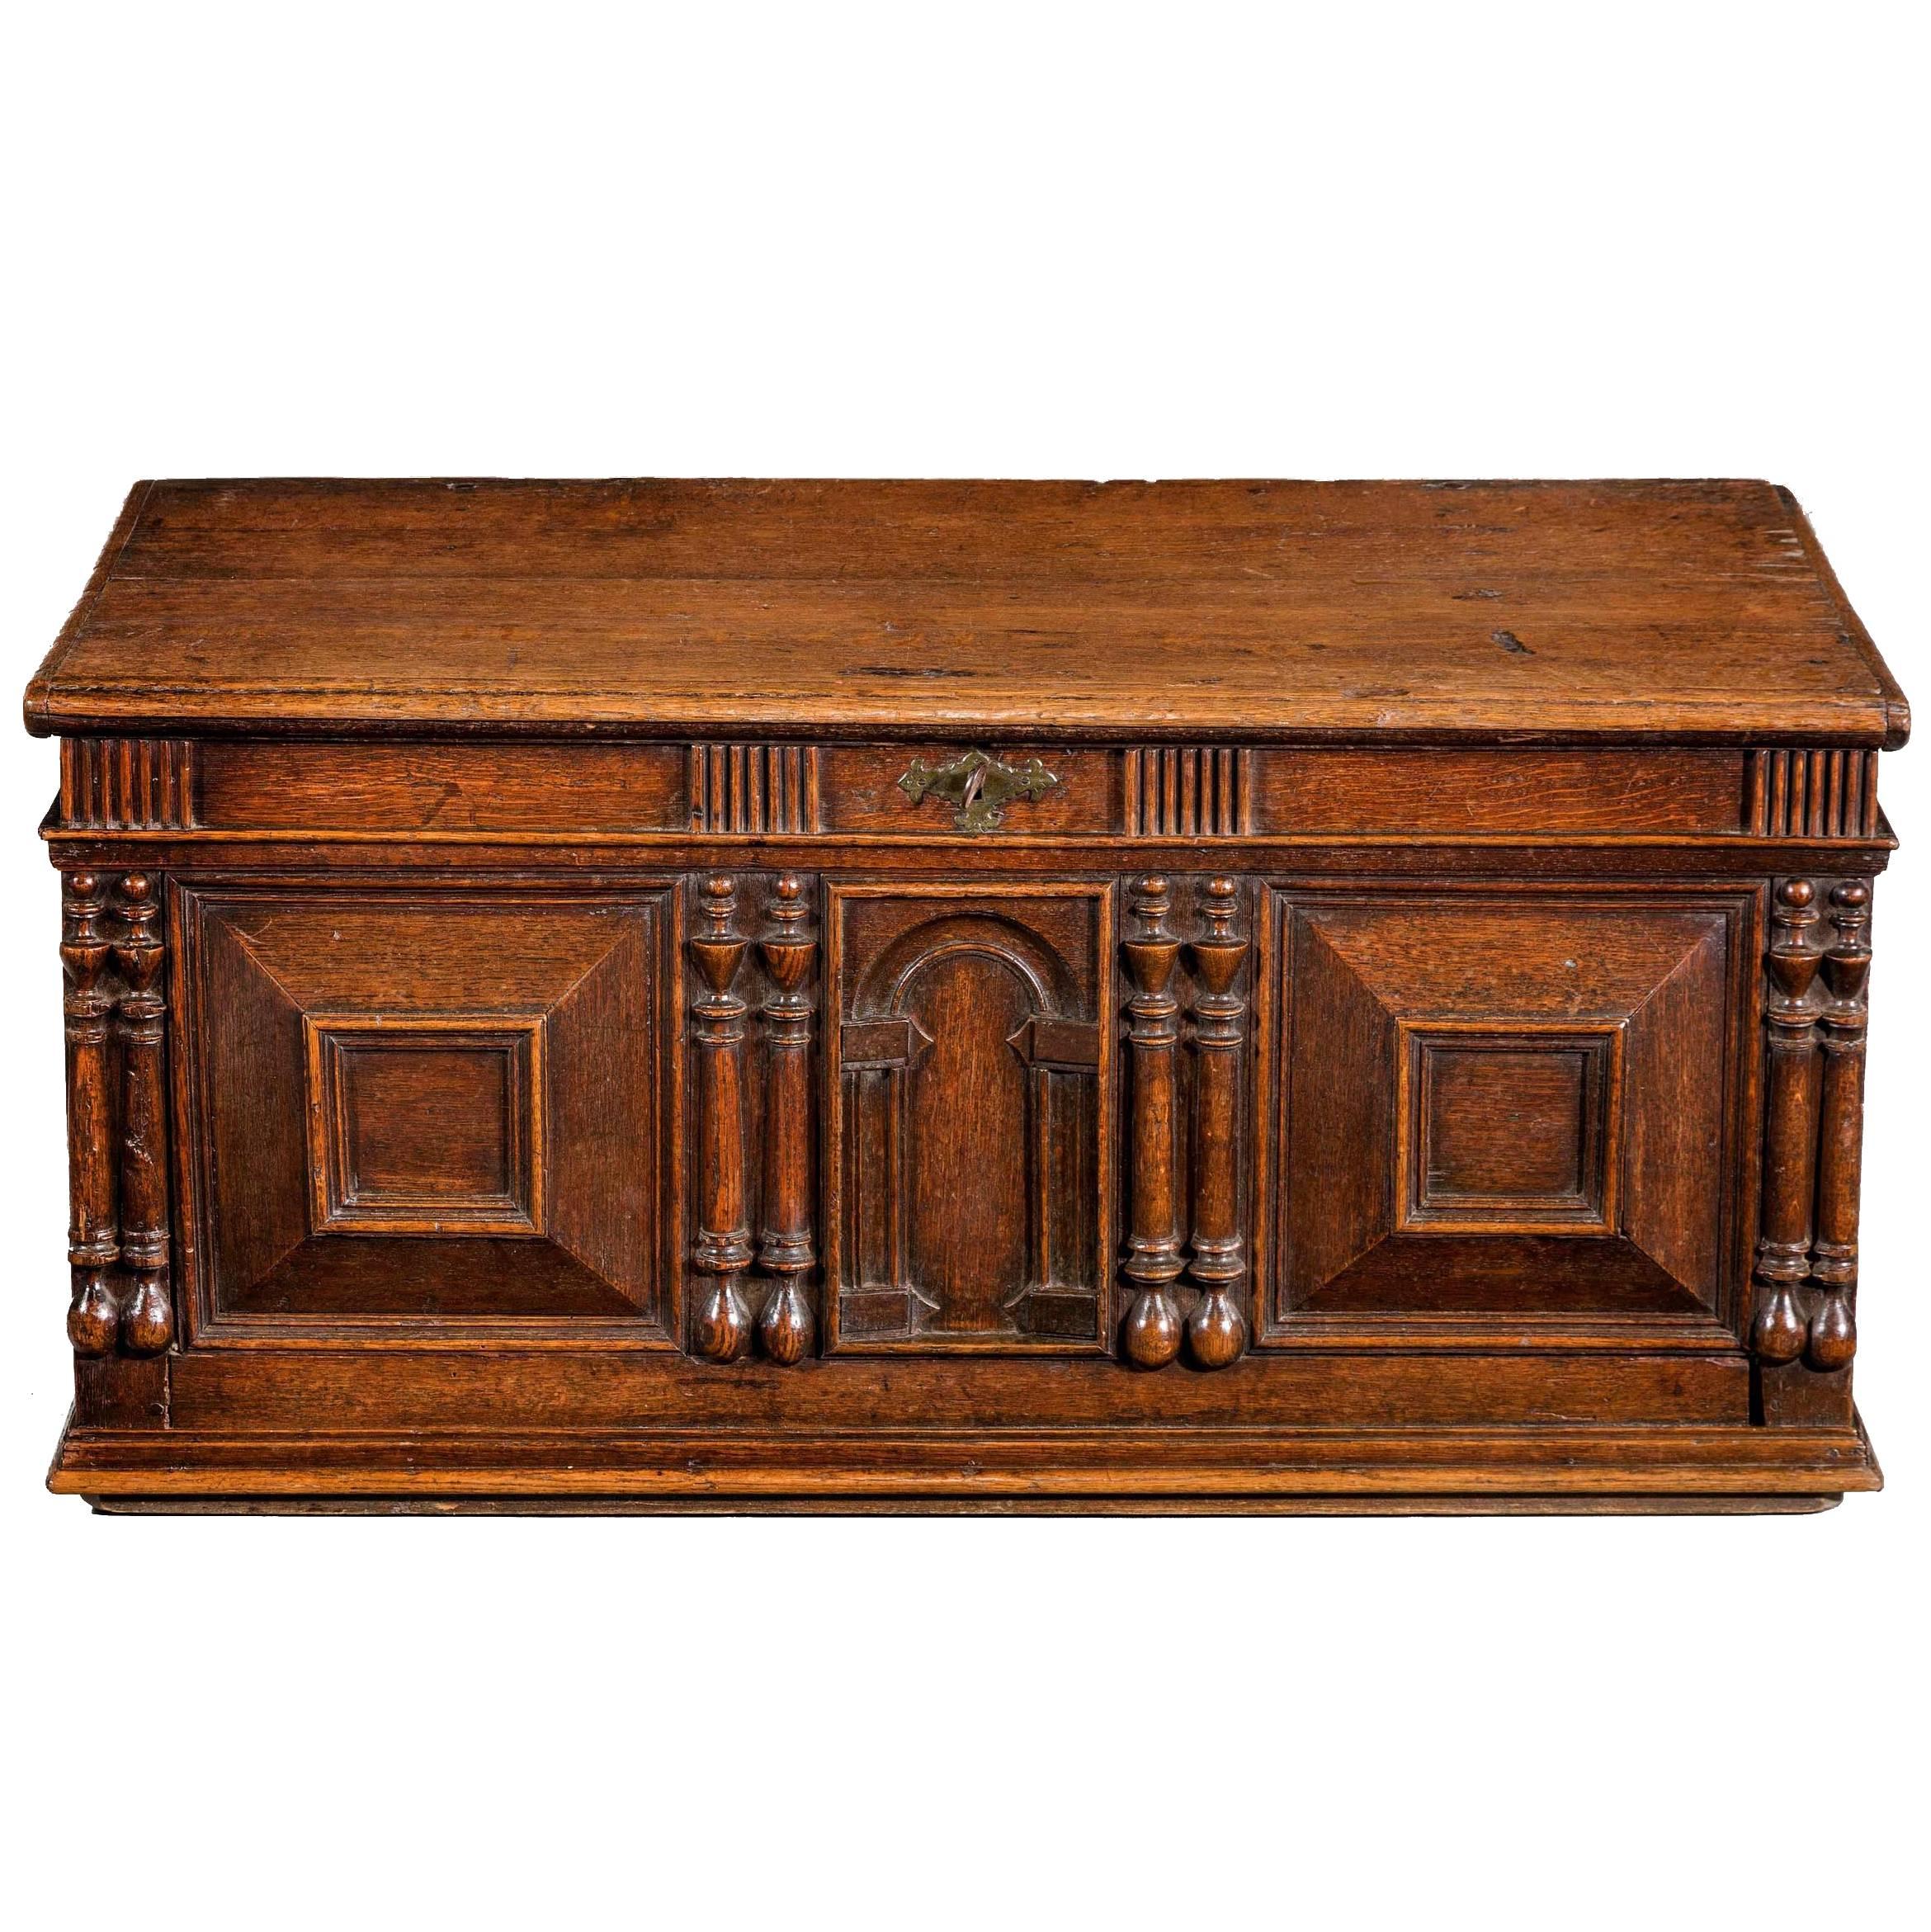 Oak Panelled Early 18th Century Chest Coffer